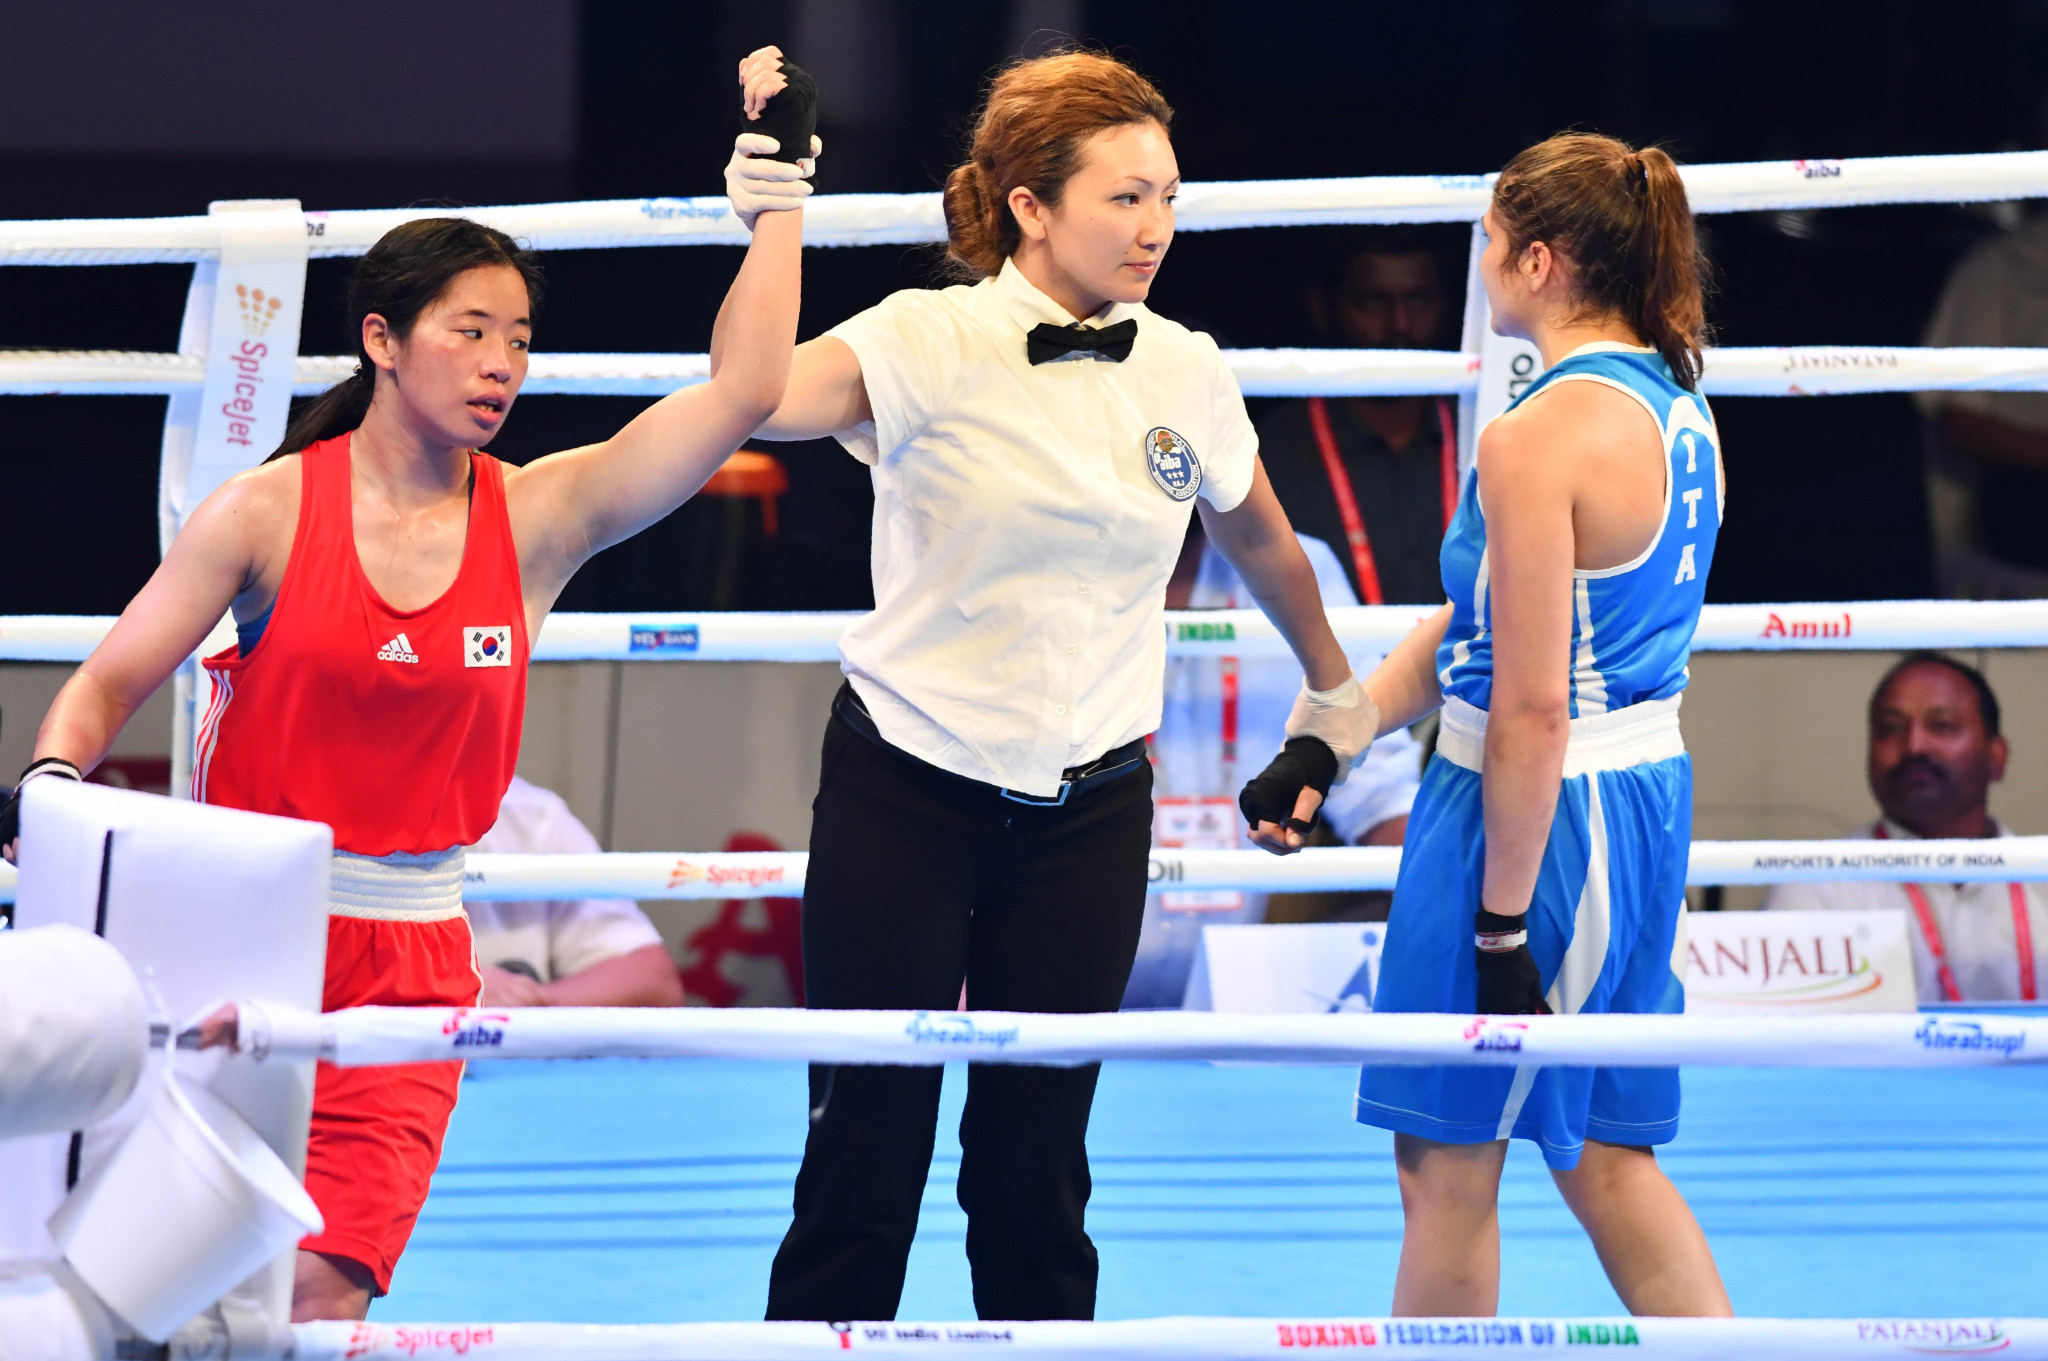 Men's and women's events will be held at the AIBA Youth World Boxing Championships ©Getty Images